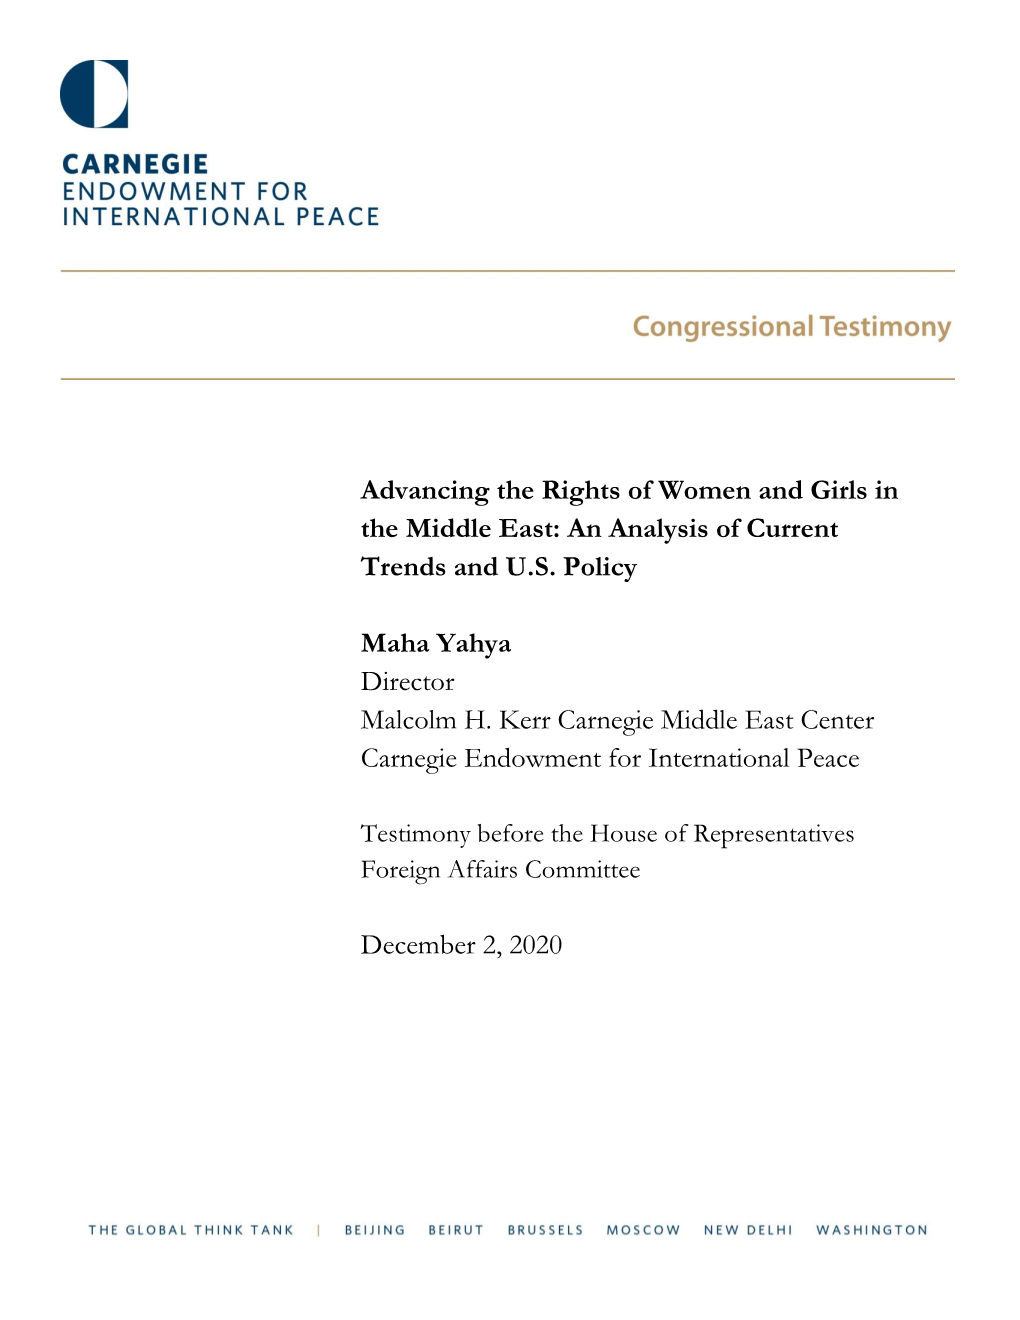 Advancing the Rights of Women and Girls in the Middle East: an Analysis of Current Trends and U.S